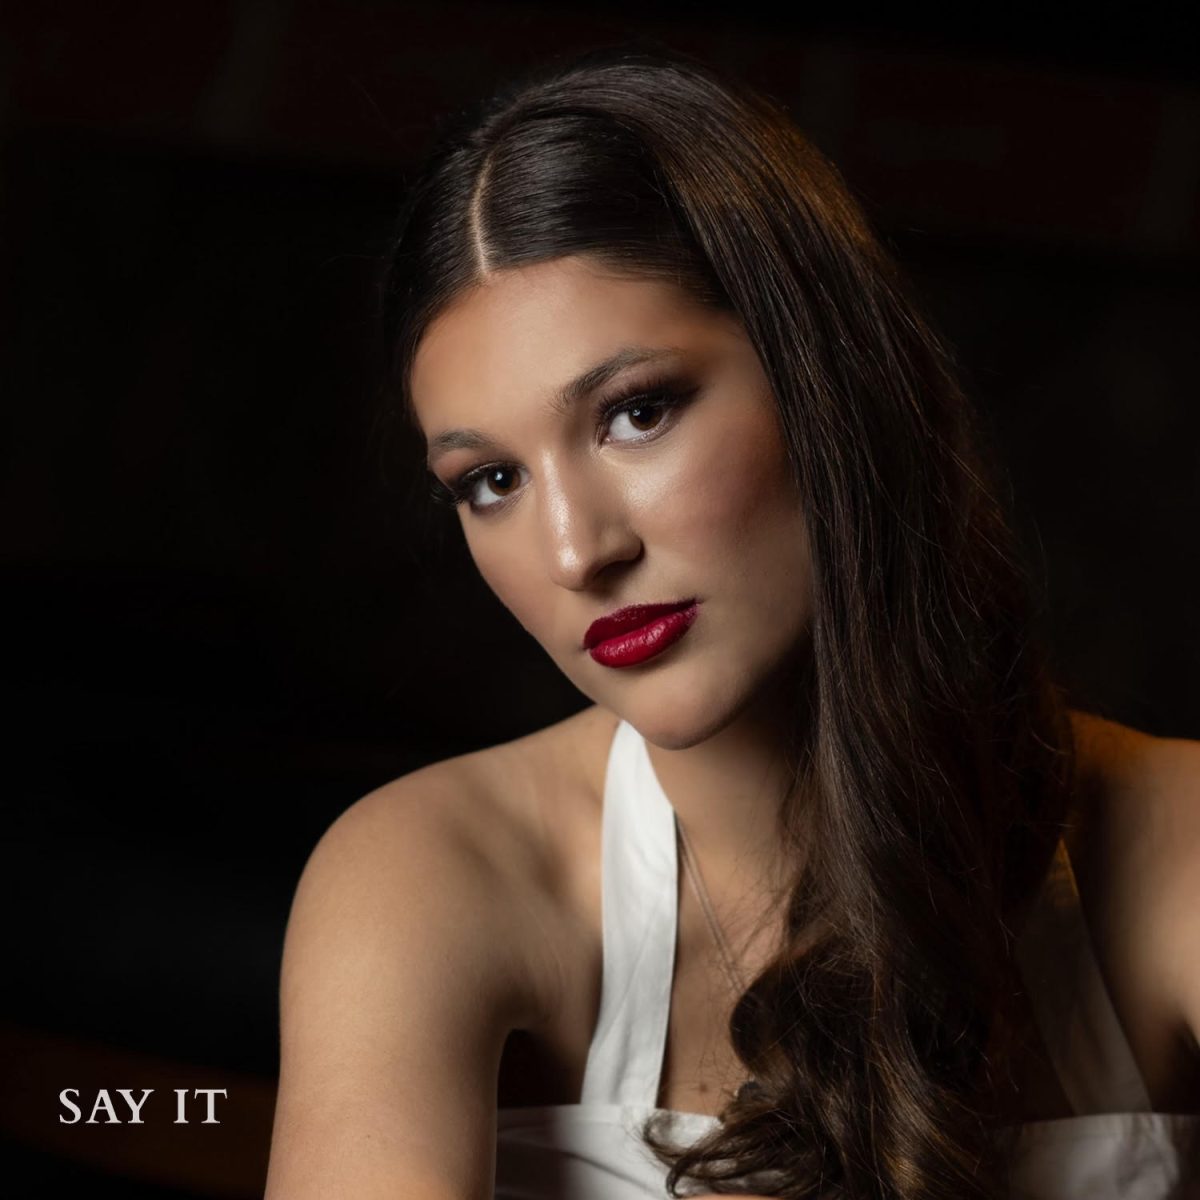 Cover art of “Say It.” (Courtesy of Lexi Anand and Kathy Thomas)